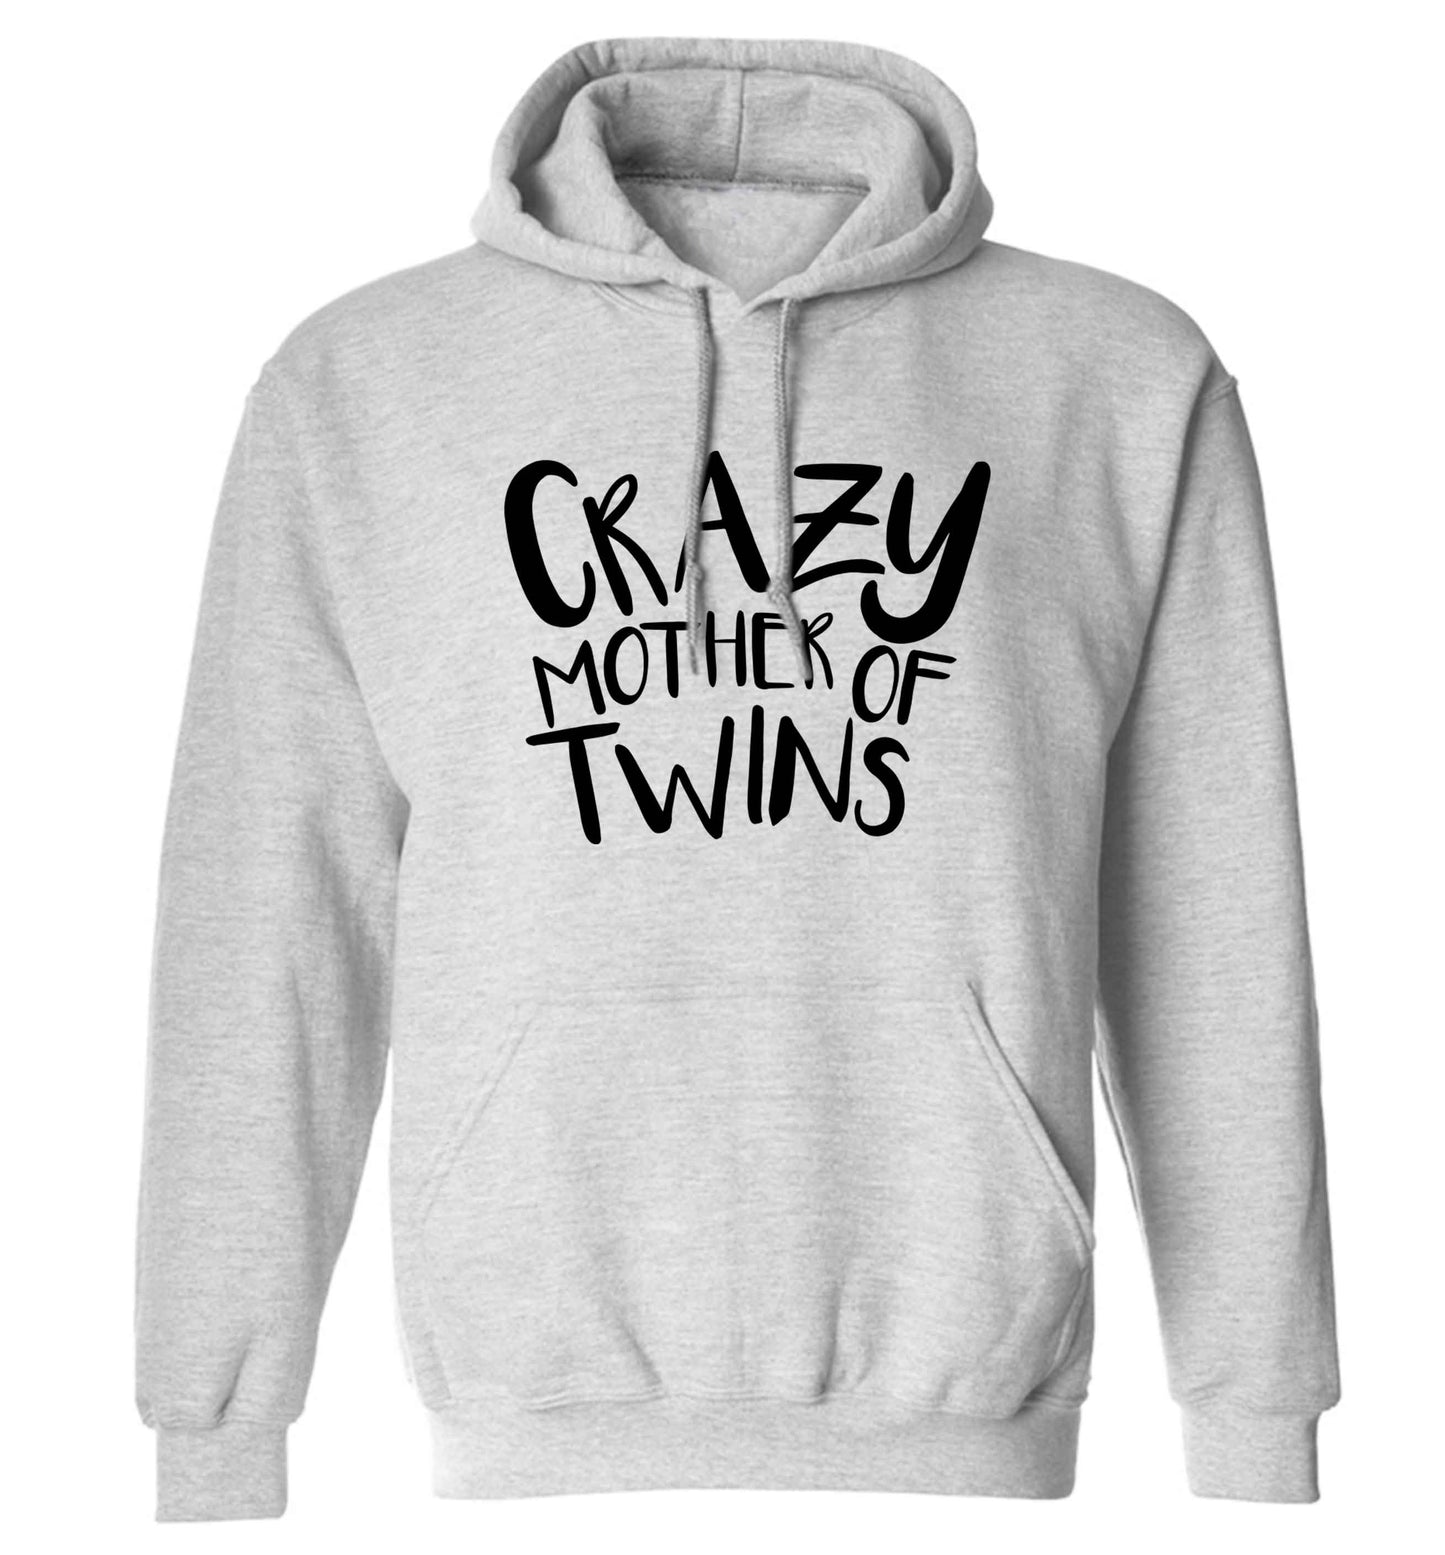 Crazy mother of twins adults unisex grey hoodie 2XL